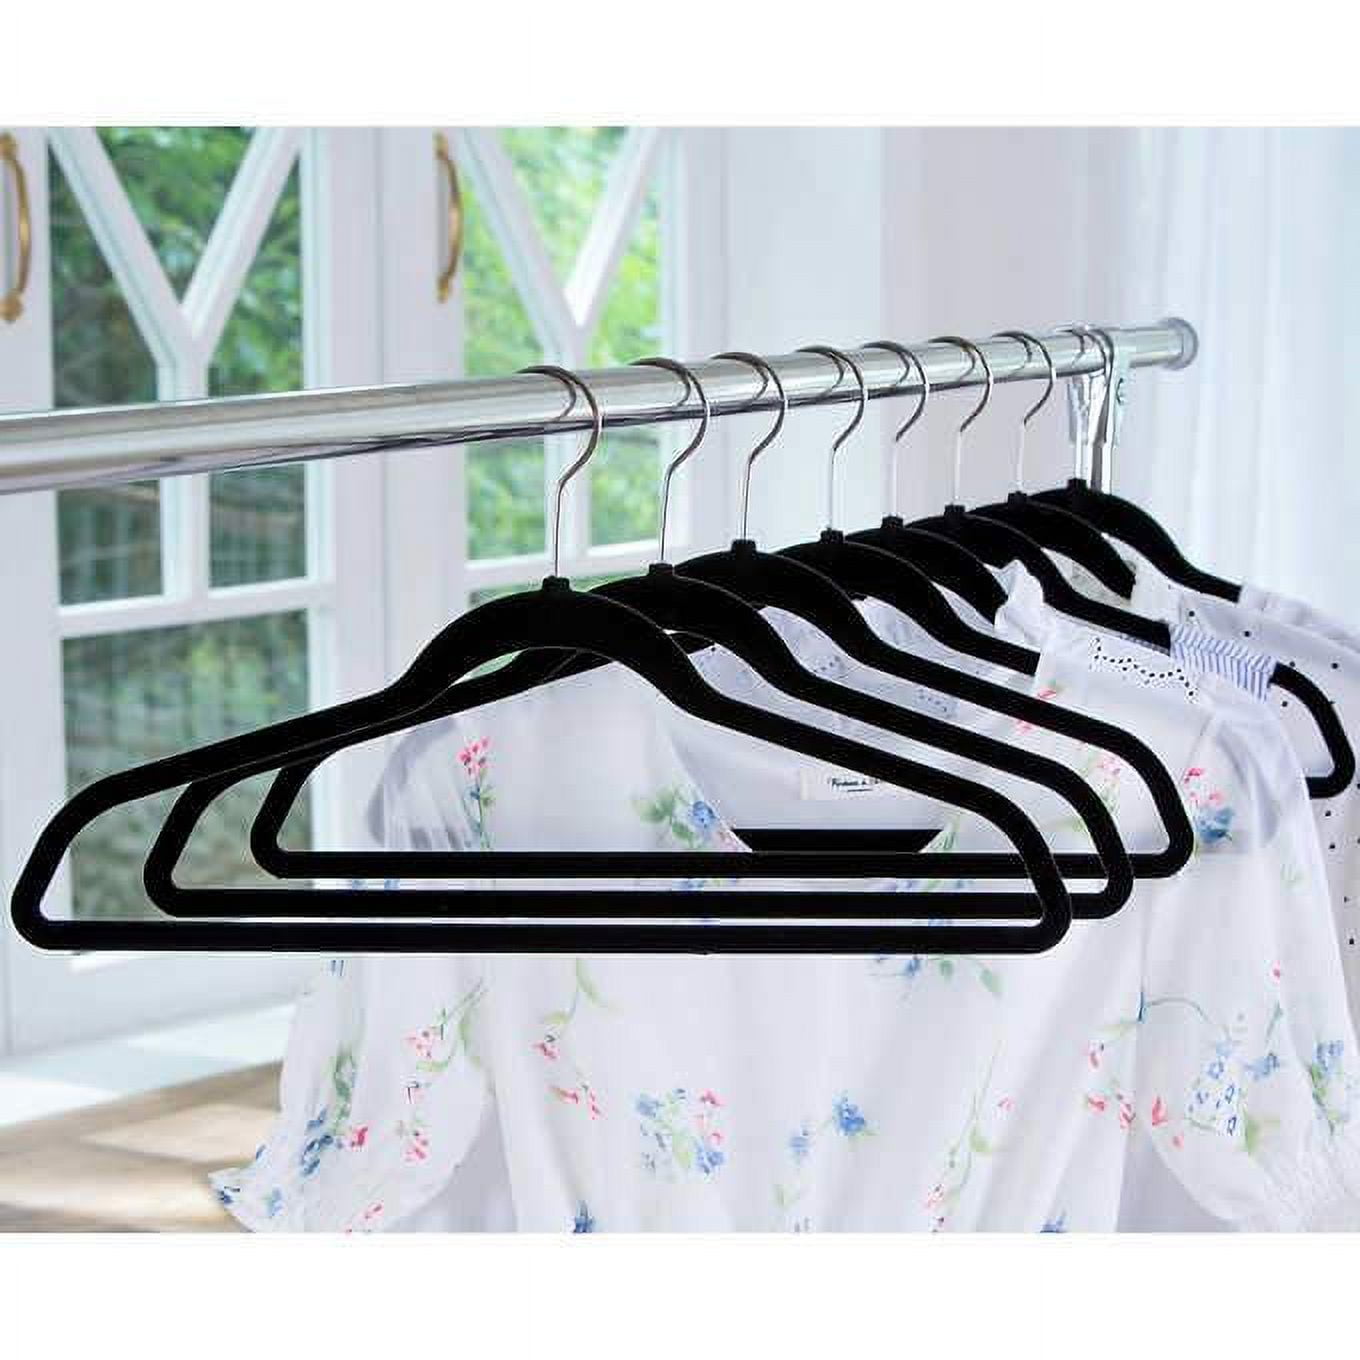 Finnhomy 50 Pack Plastic Hangers, Durable Clothes Hangers with Non-Slip  Pads, Space Saving Easy Slide Clothes Hanger for Closet, Great for Shirts